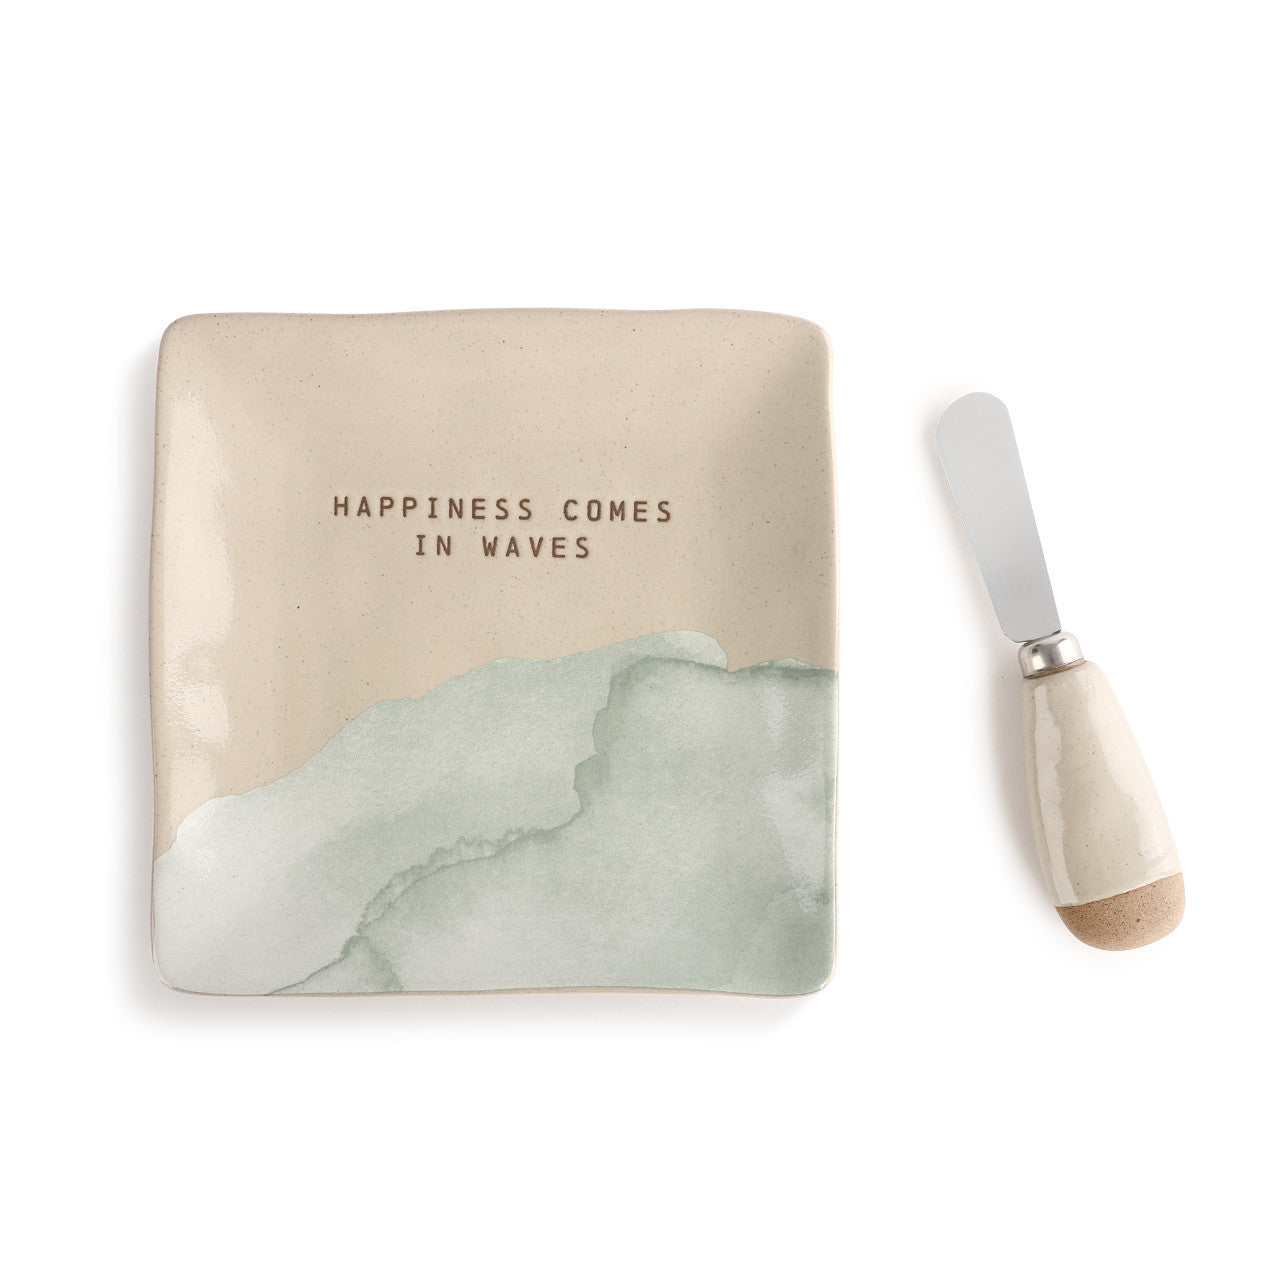 Demdaco Plate/Spreader Set - Happiness Waves available at The Good Life Boutique